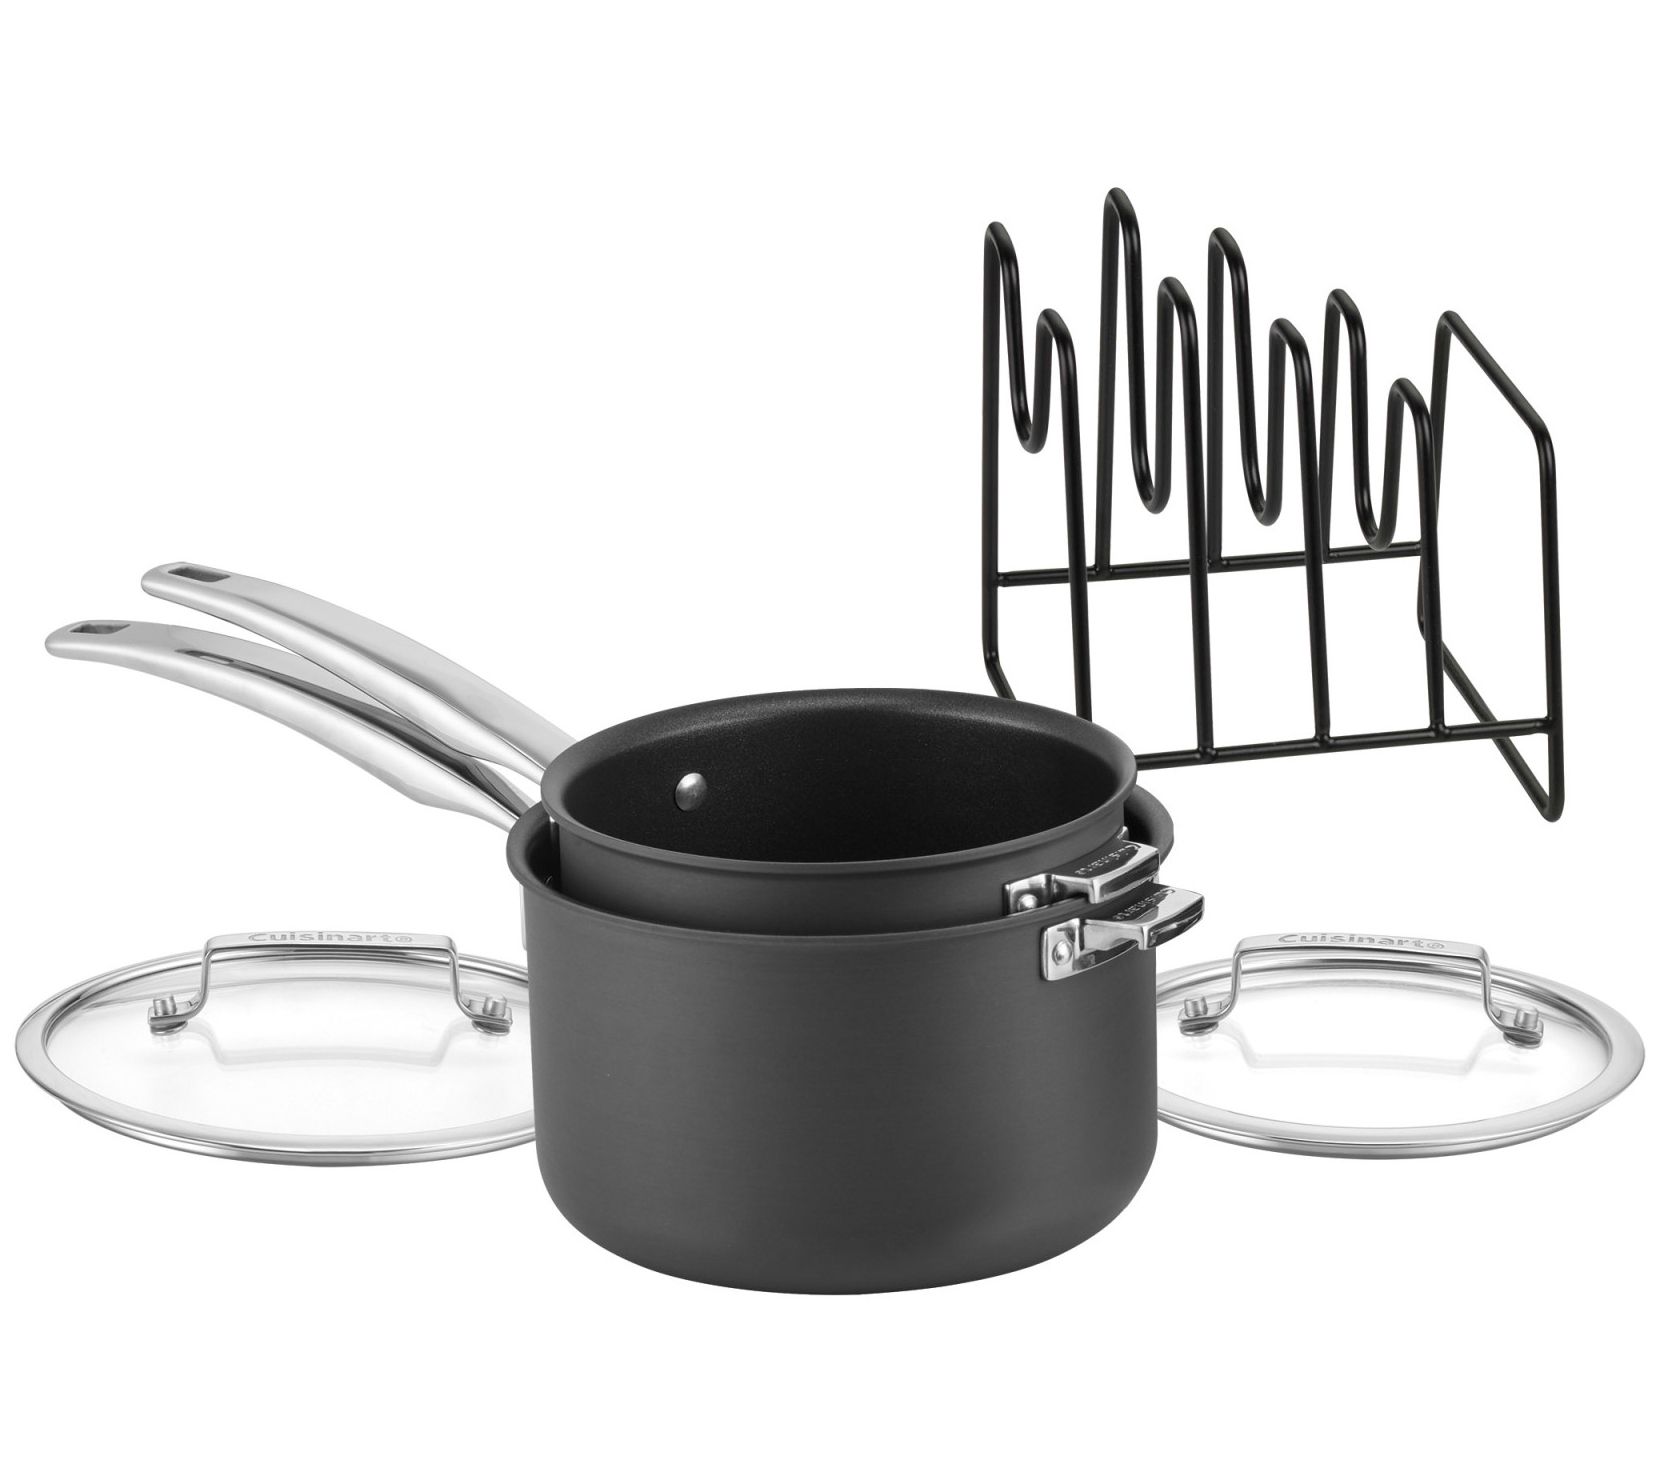 Cuisinart Classic 3.5qt Stainless Steel Saute Pan with Cover and